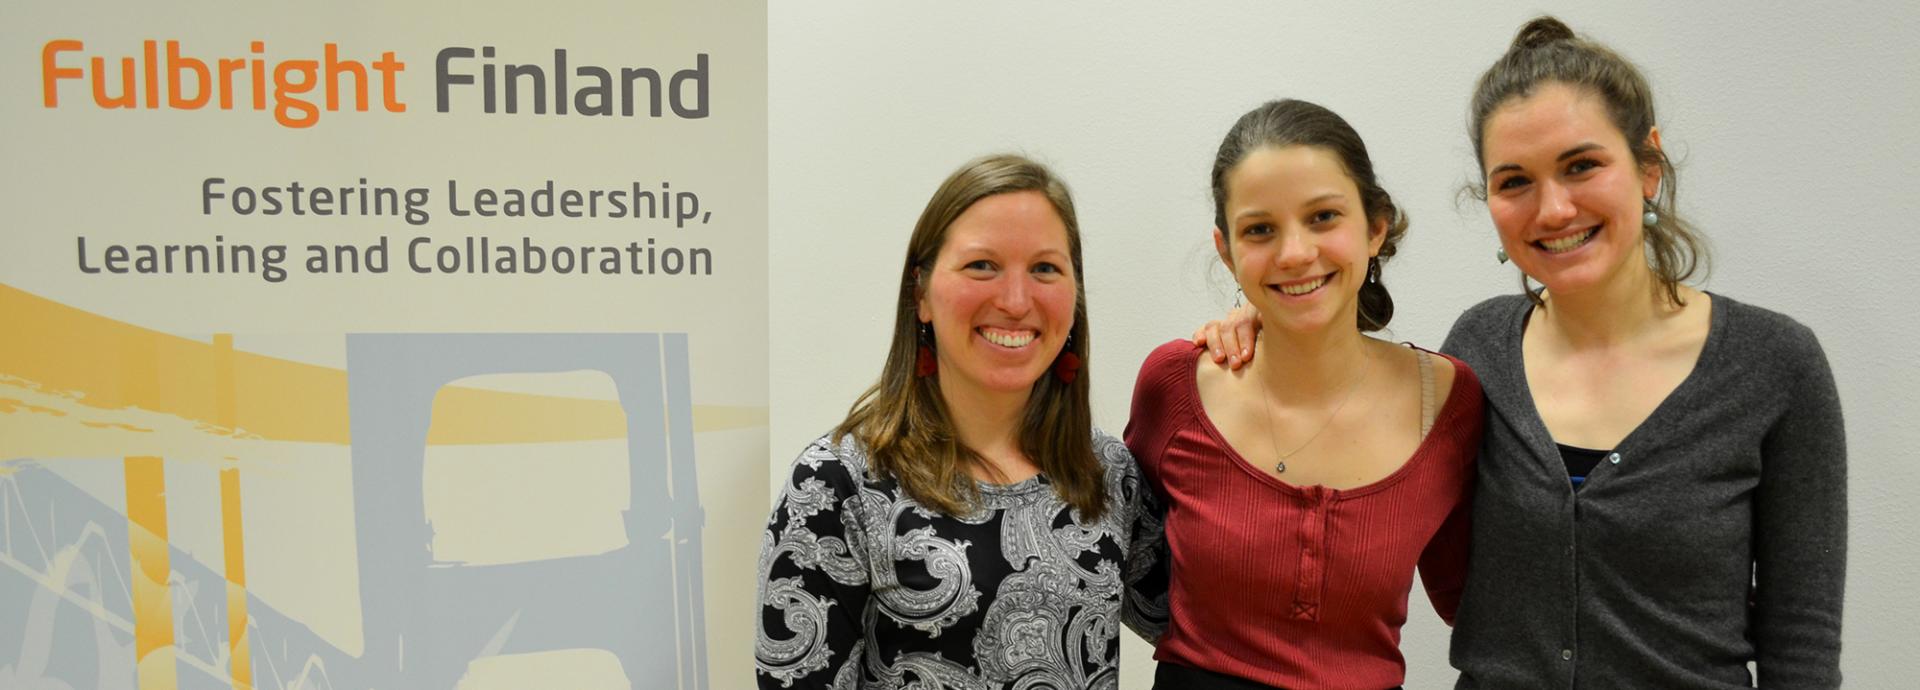 2017 Roth Endowment Award winners smiling next to Fulbright Finland roll-up